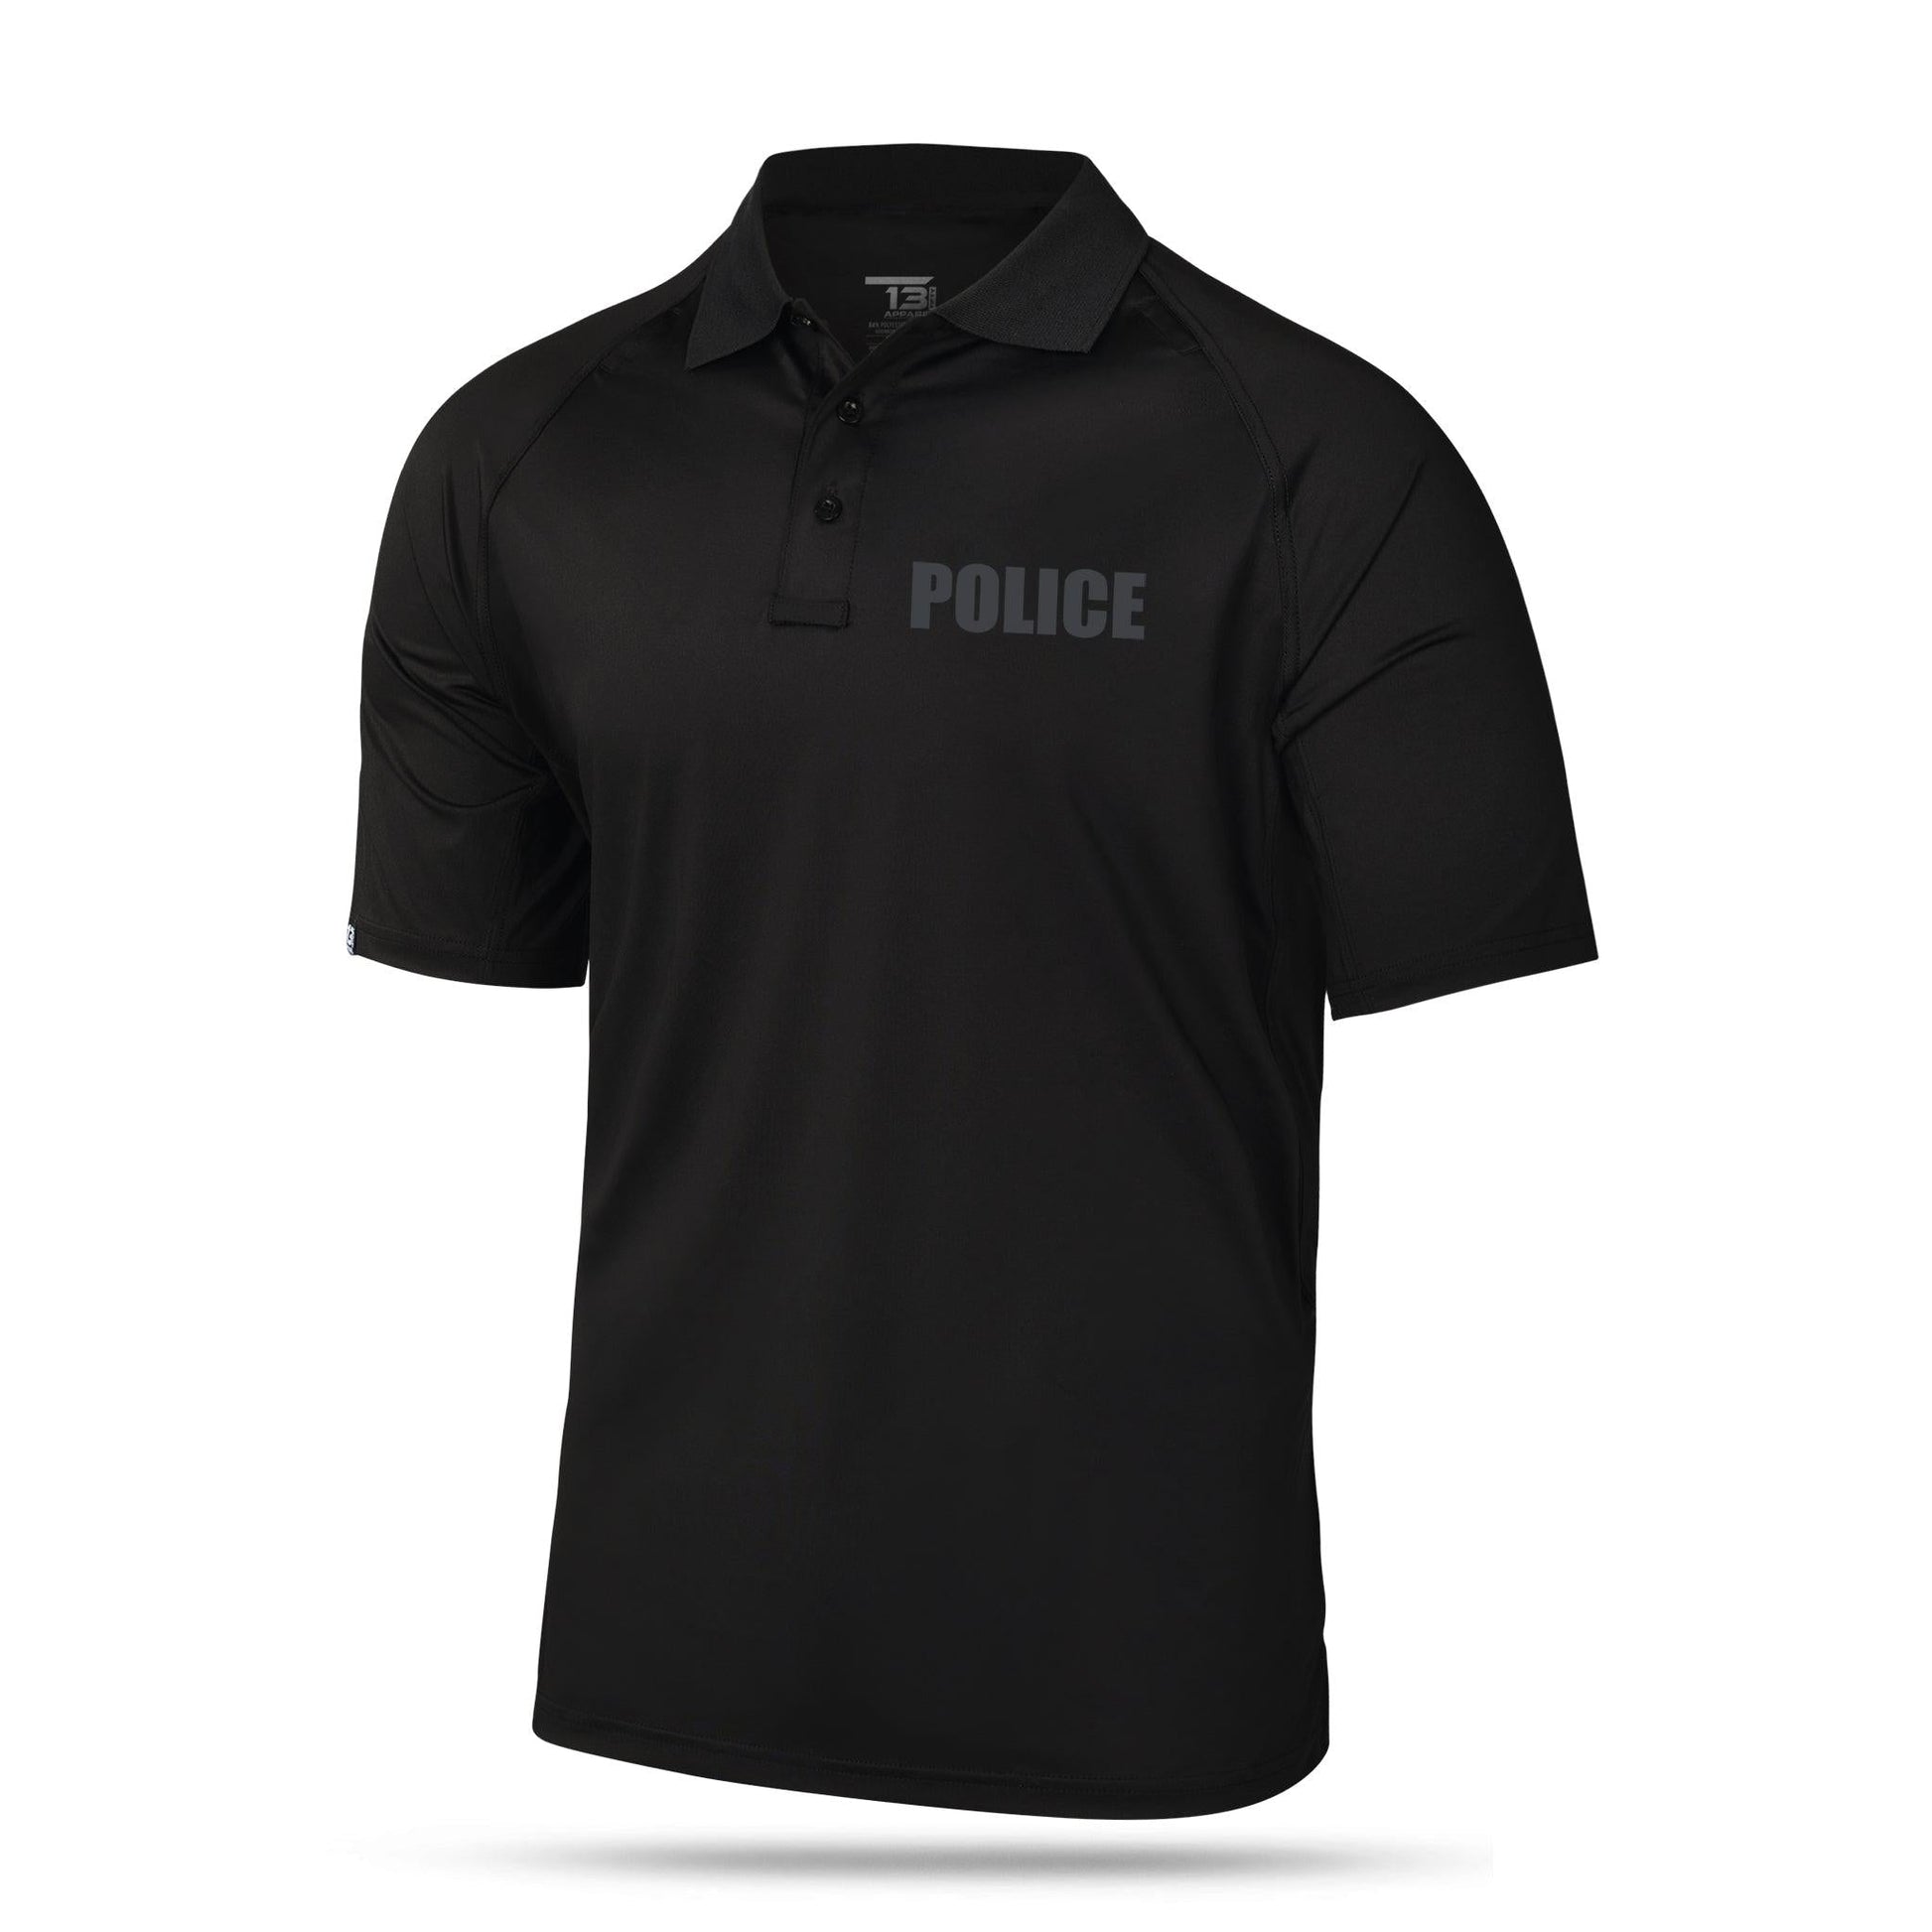 [POLICE] Men's Performance Polo [BLK/BLK]-13 Fifty Apparel